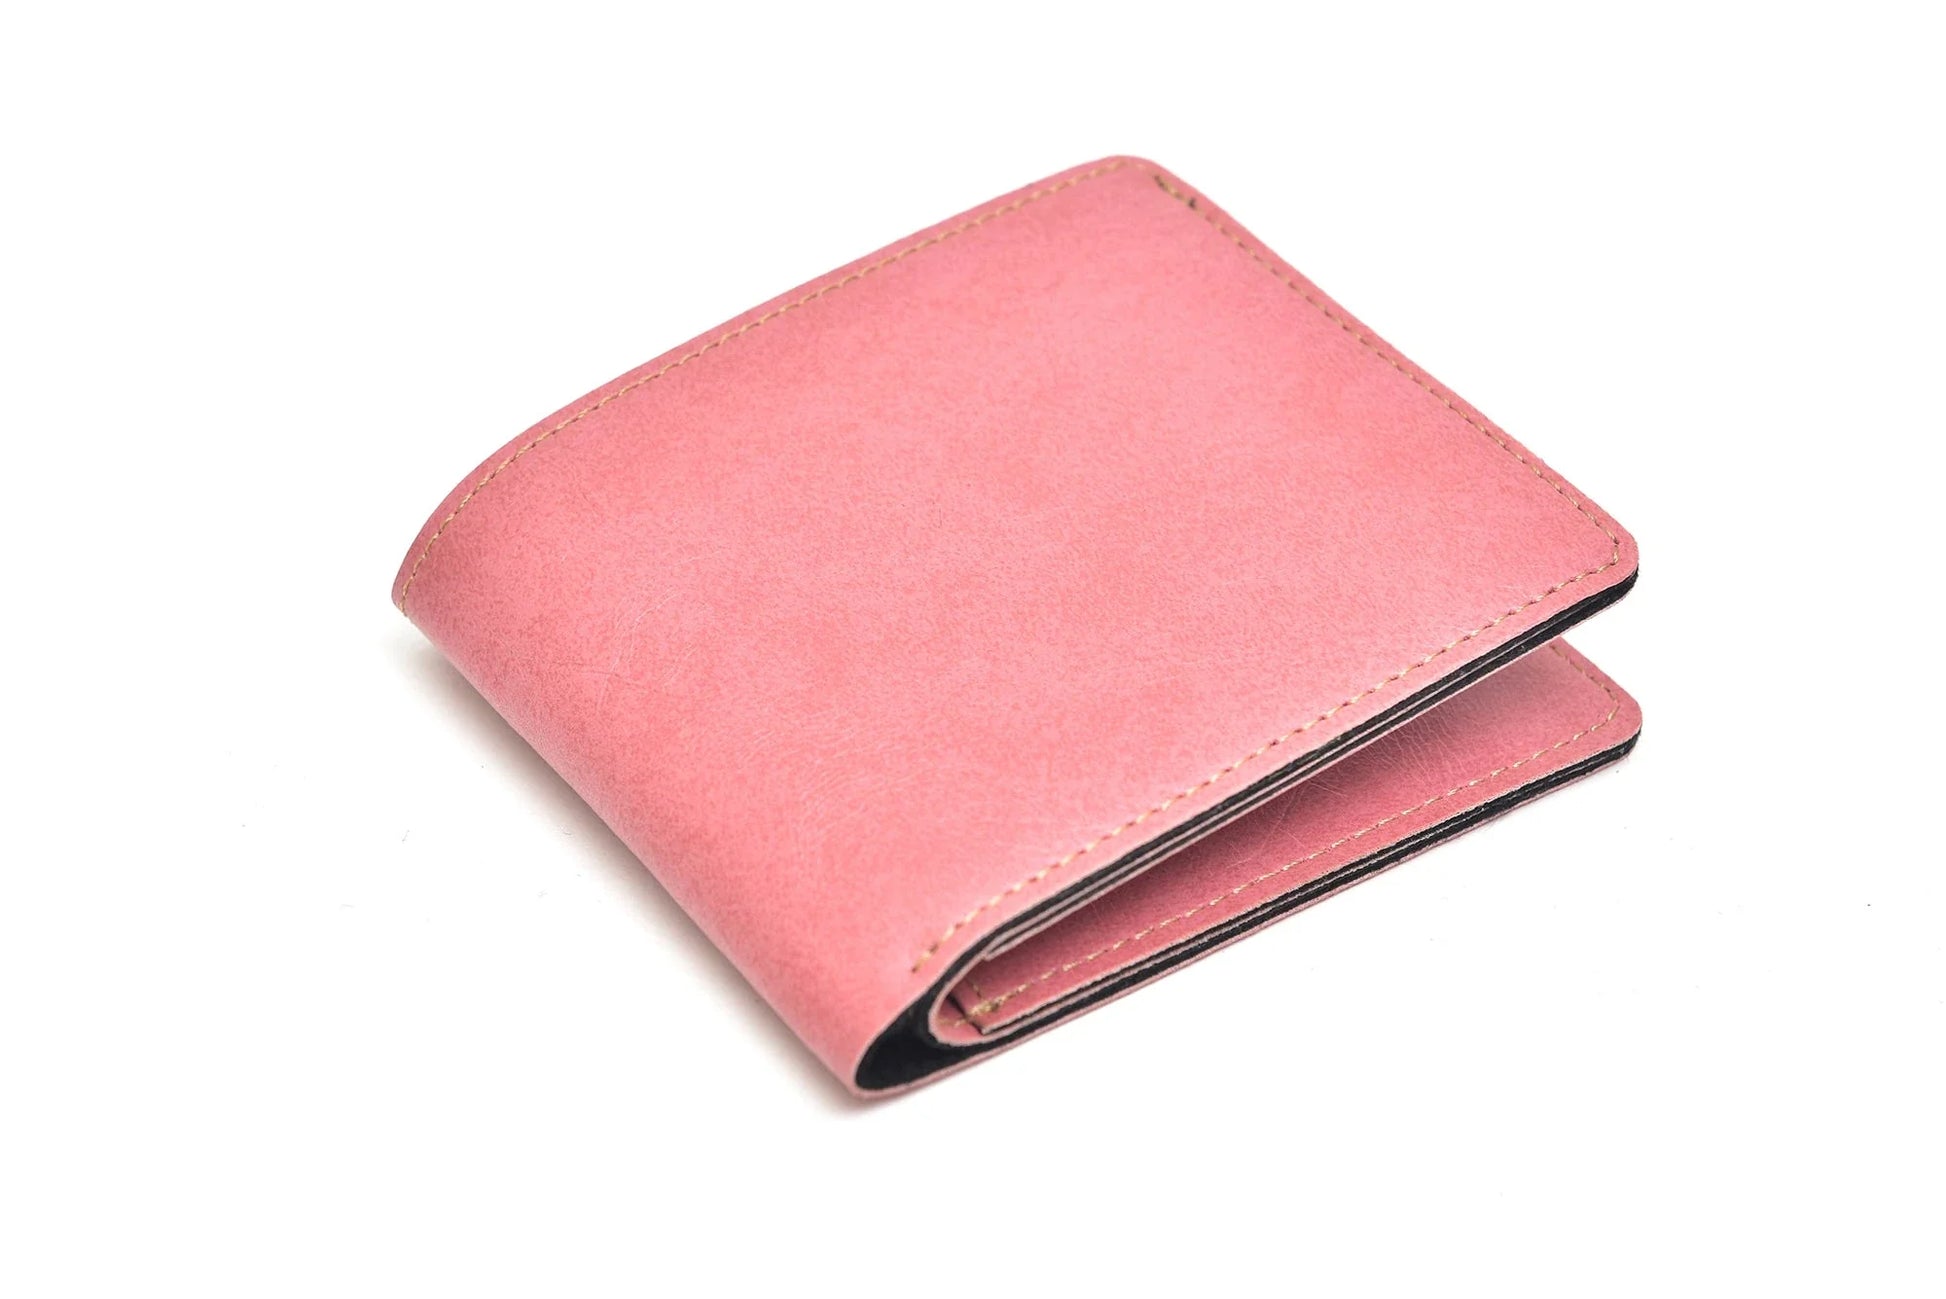 Looking for a stylish and practical accessory? Our custom leather wallet is the perfect choice! Made from high-quality materials and available in a variety of colors, this wallet is both stylish and functional, making it the perfect choice for everyday use.